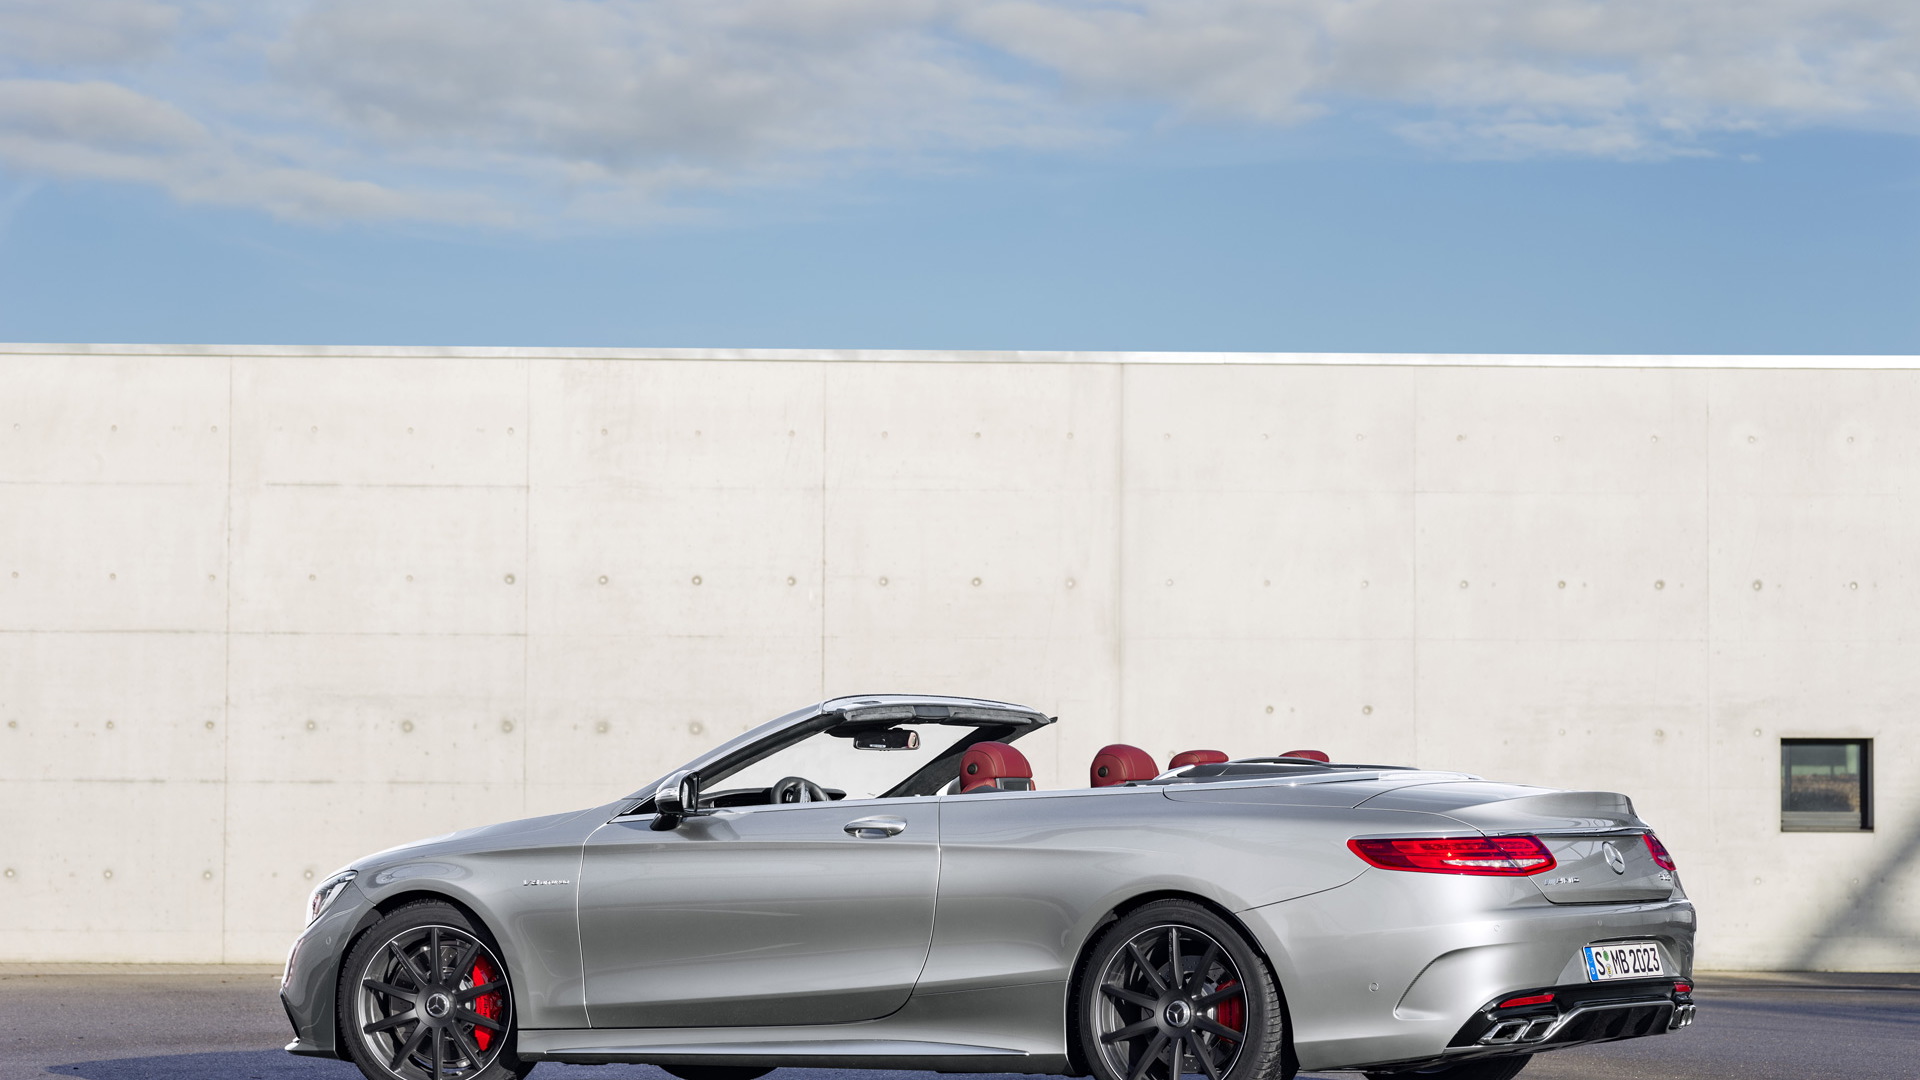 2017 Mercedes-AMG S63 4Matic Cabriolet Edition 130